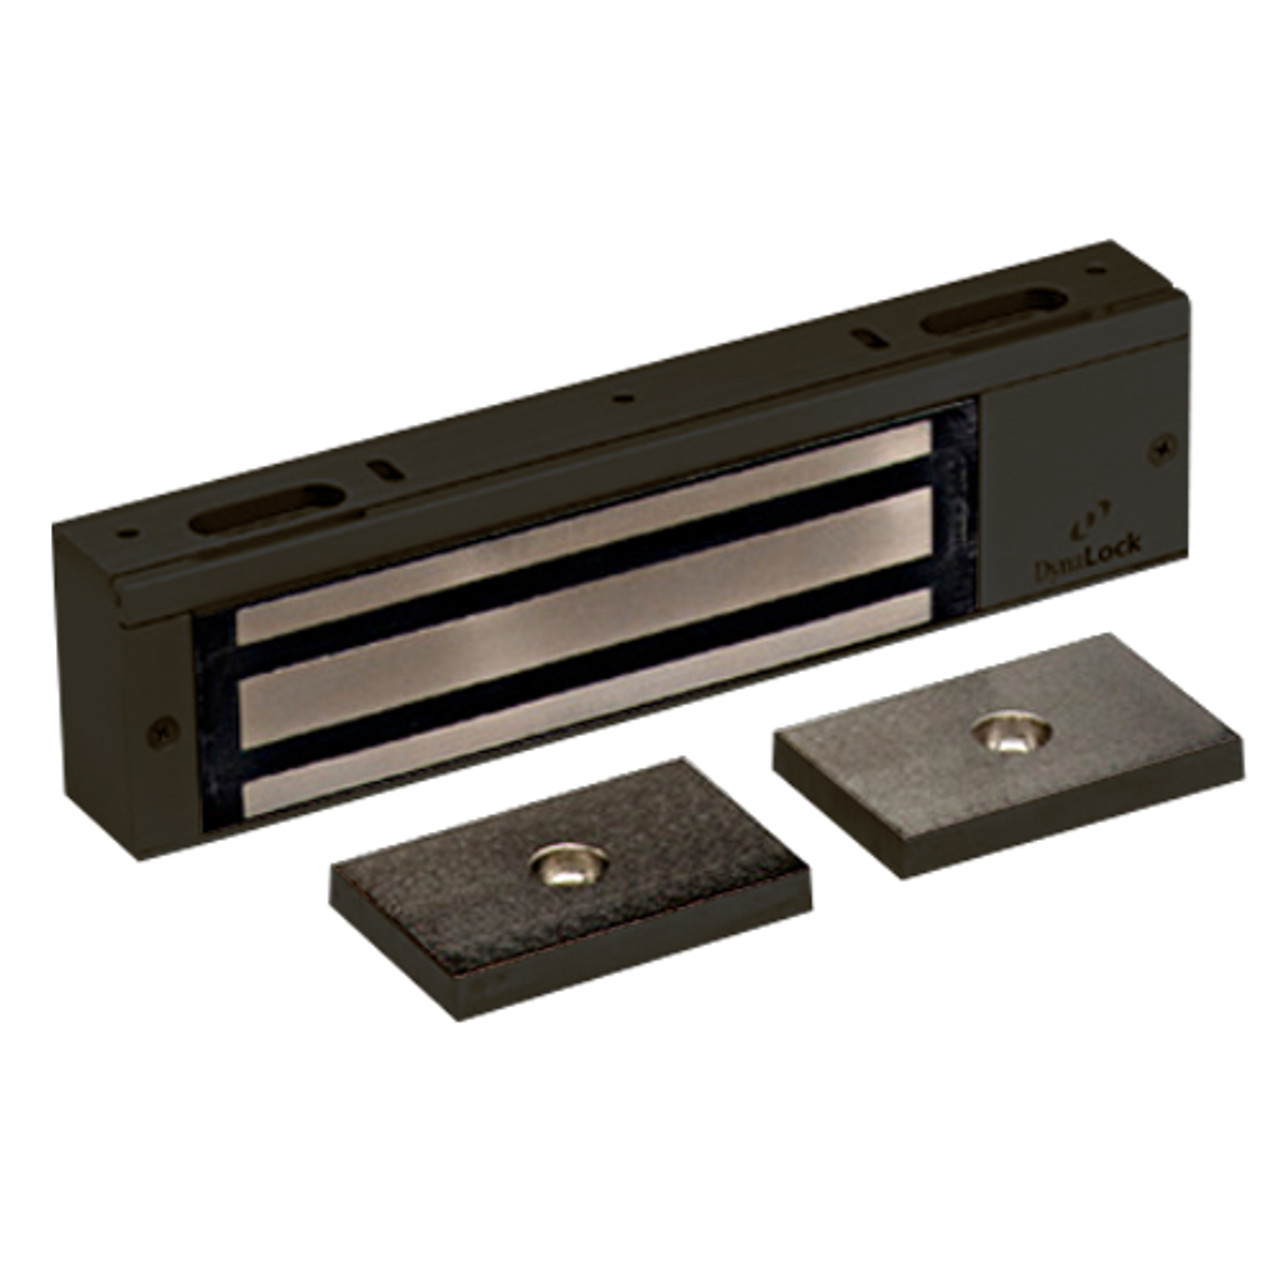 2012-US10B DynaLock 2000 Series 1200 LB Holding Force Single Electromagnetic Lock Pair Outswing in Oil Rubbed Bronze